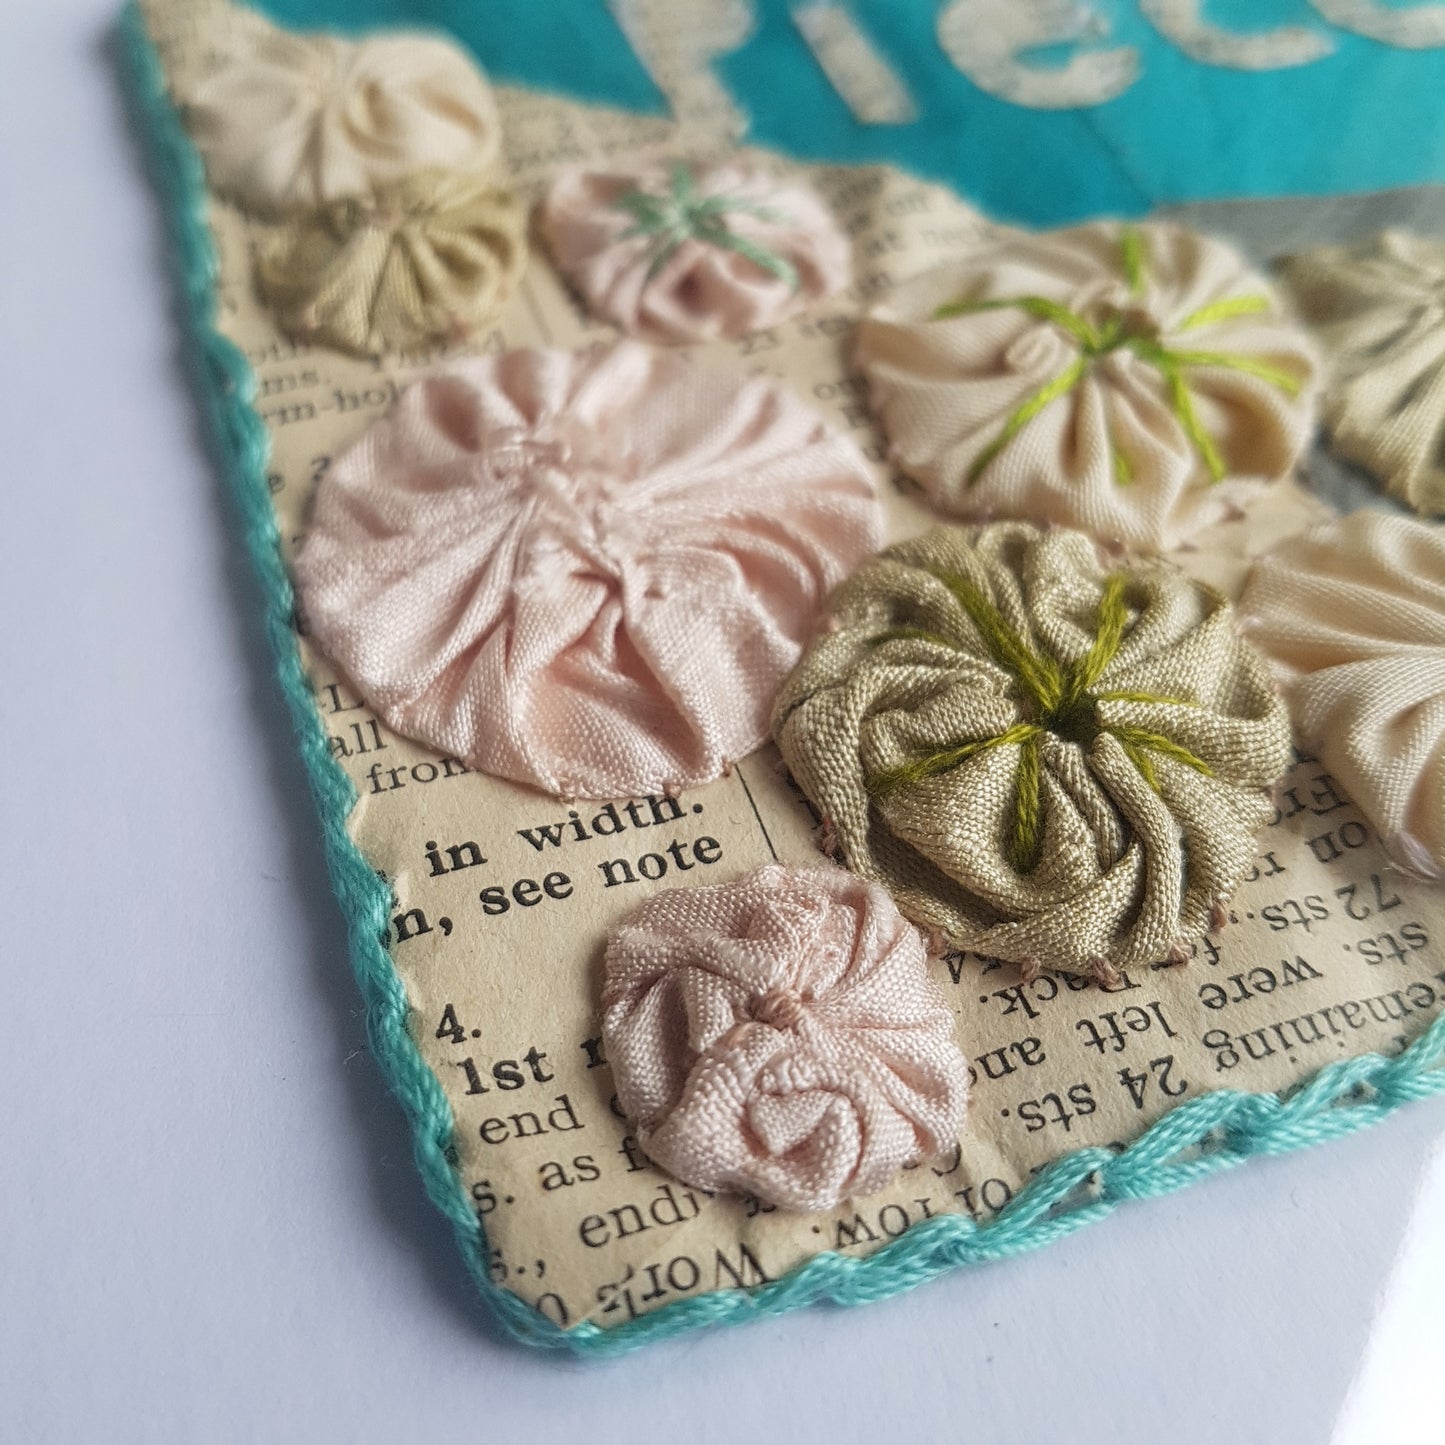 How To Use Fabric Scraps to Create Brand New Fabric – Julia Laing